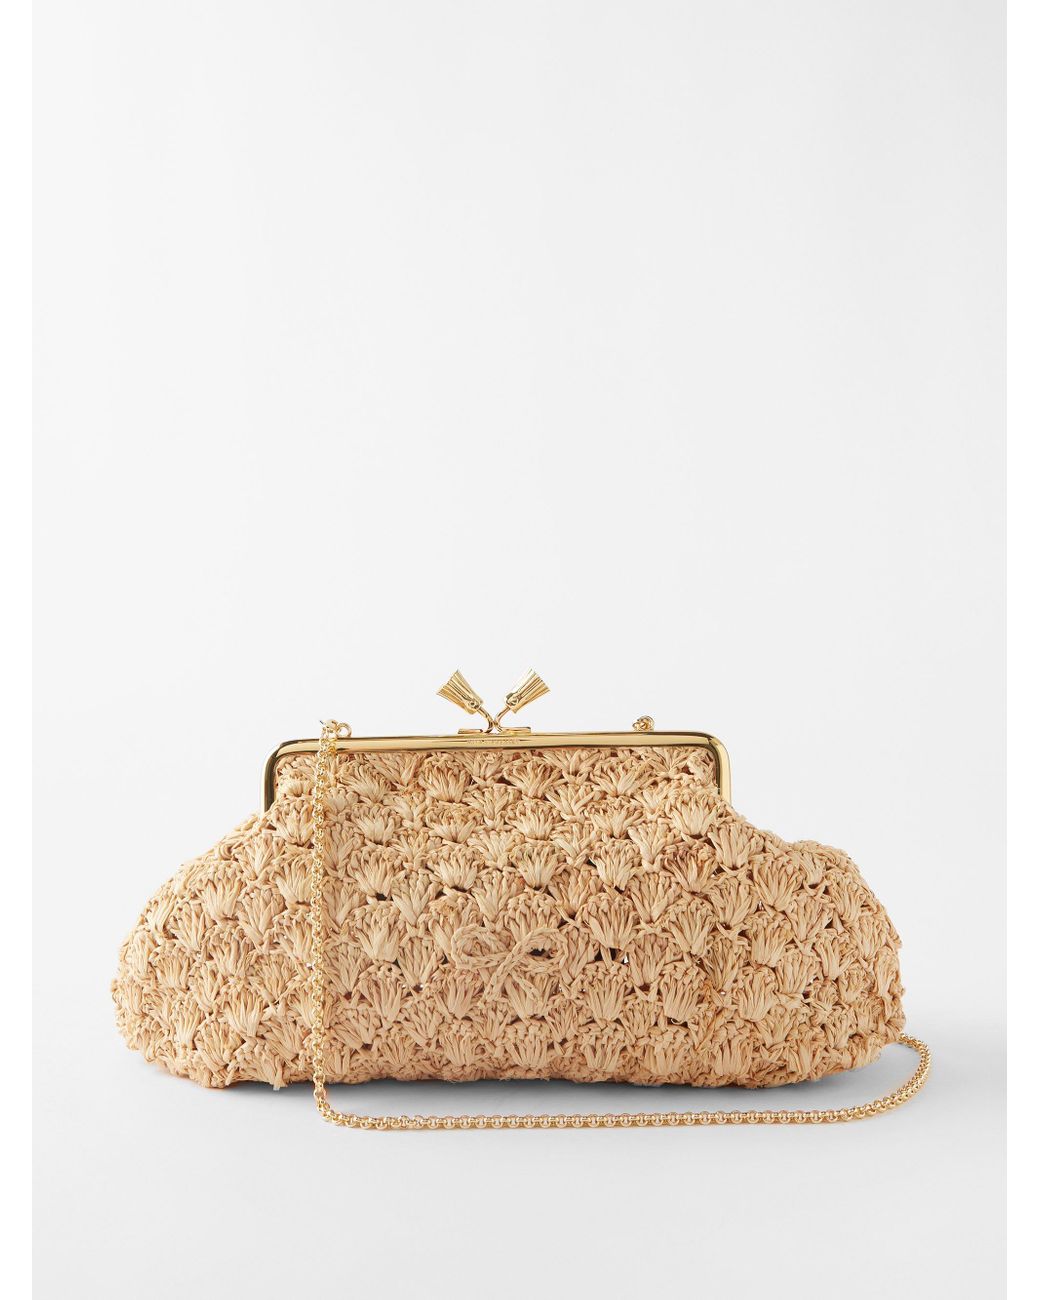 Anya Hindmarch Maud Large Faux-raffia Bow Clutch Bag in Natural | Lyst